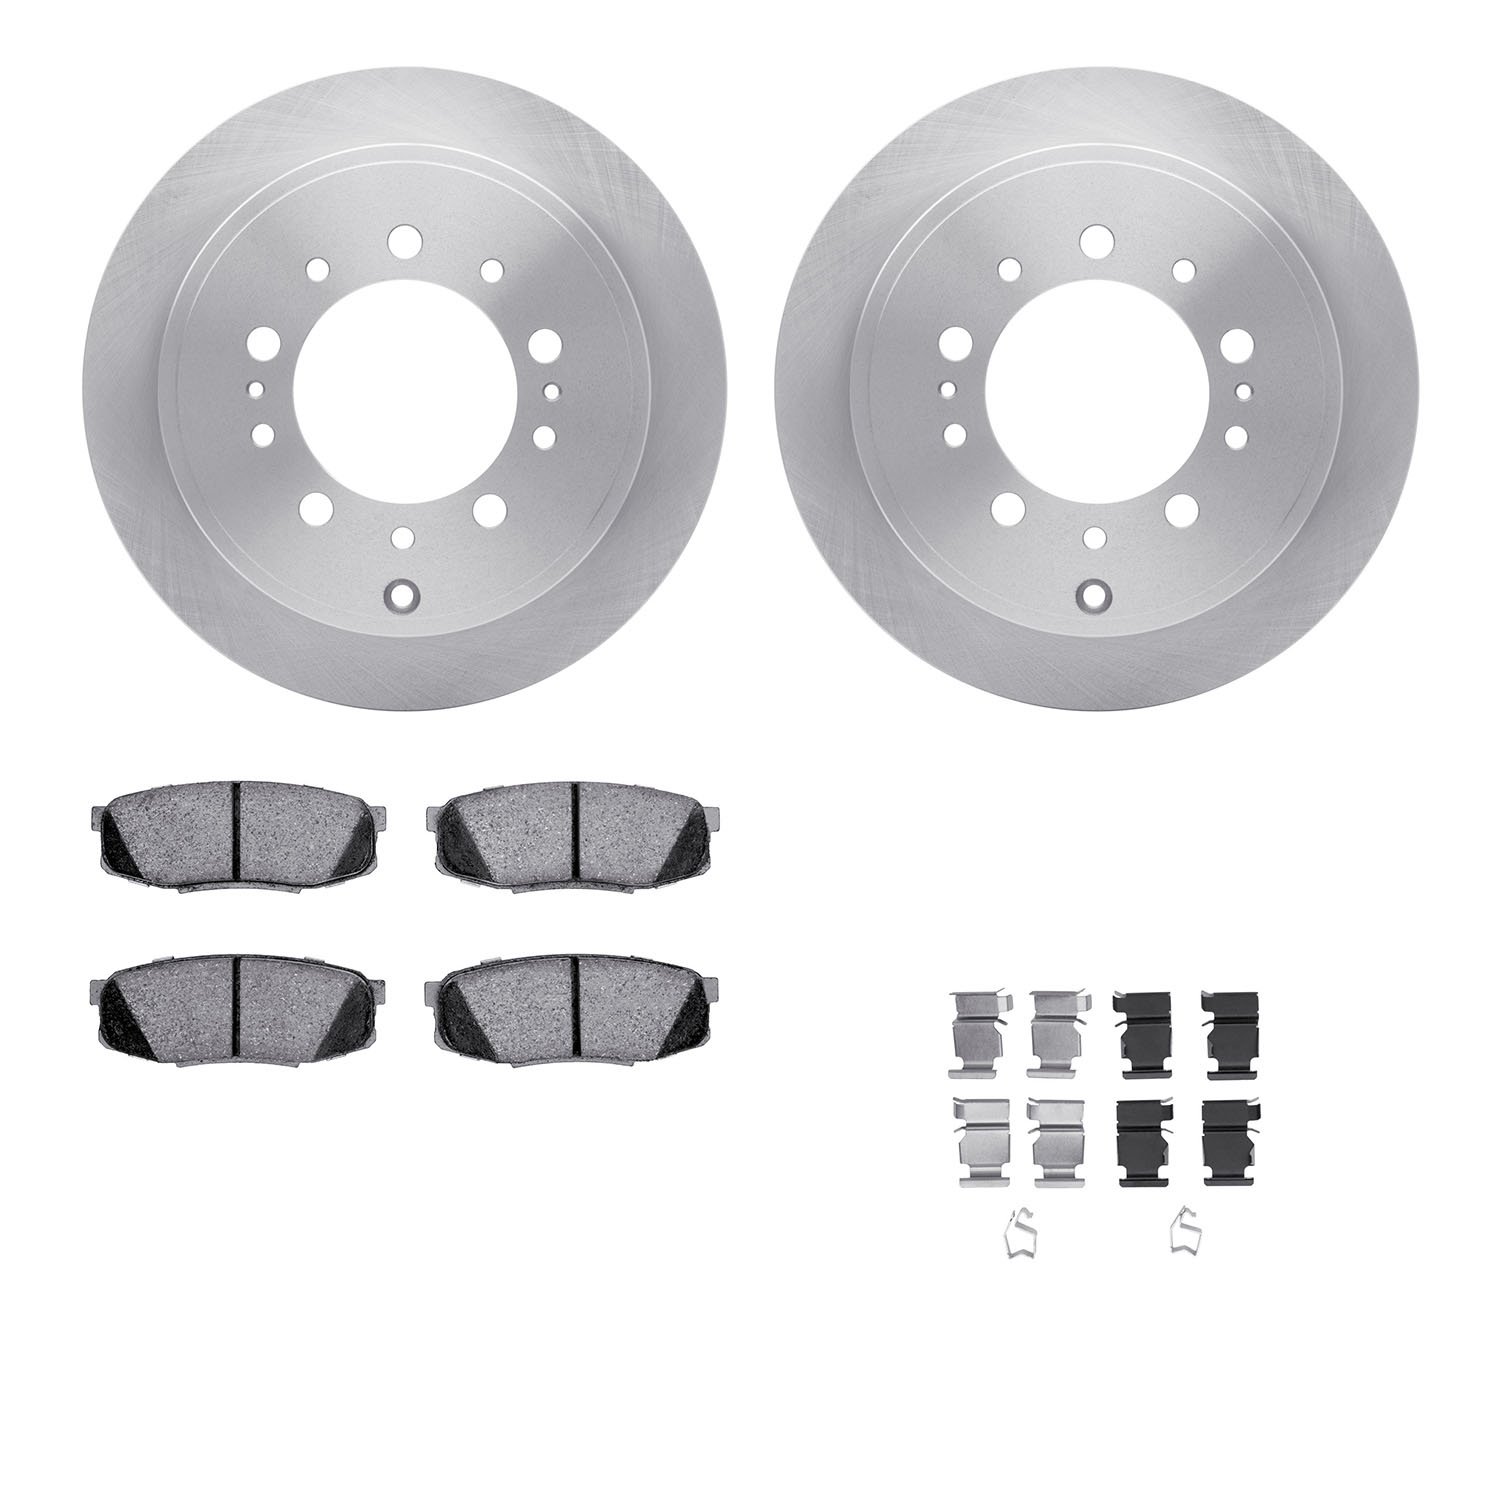 6412-76058 Brake Rotors with Ultimate-Duty Brake Pads Kit & Hardware, Fits Select Lexus/Toyota/Scion, Position: Rear